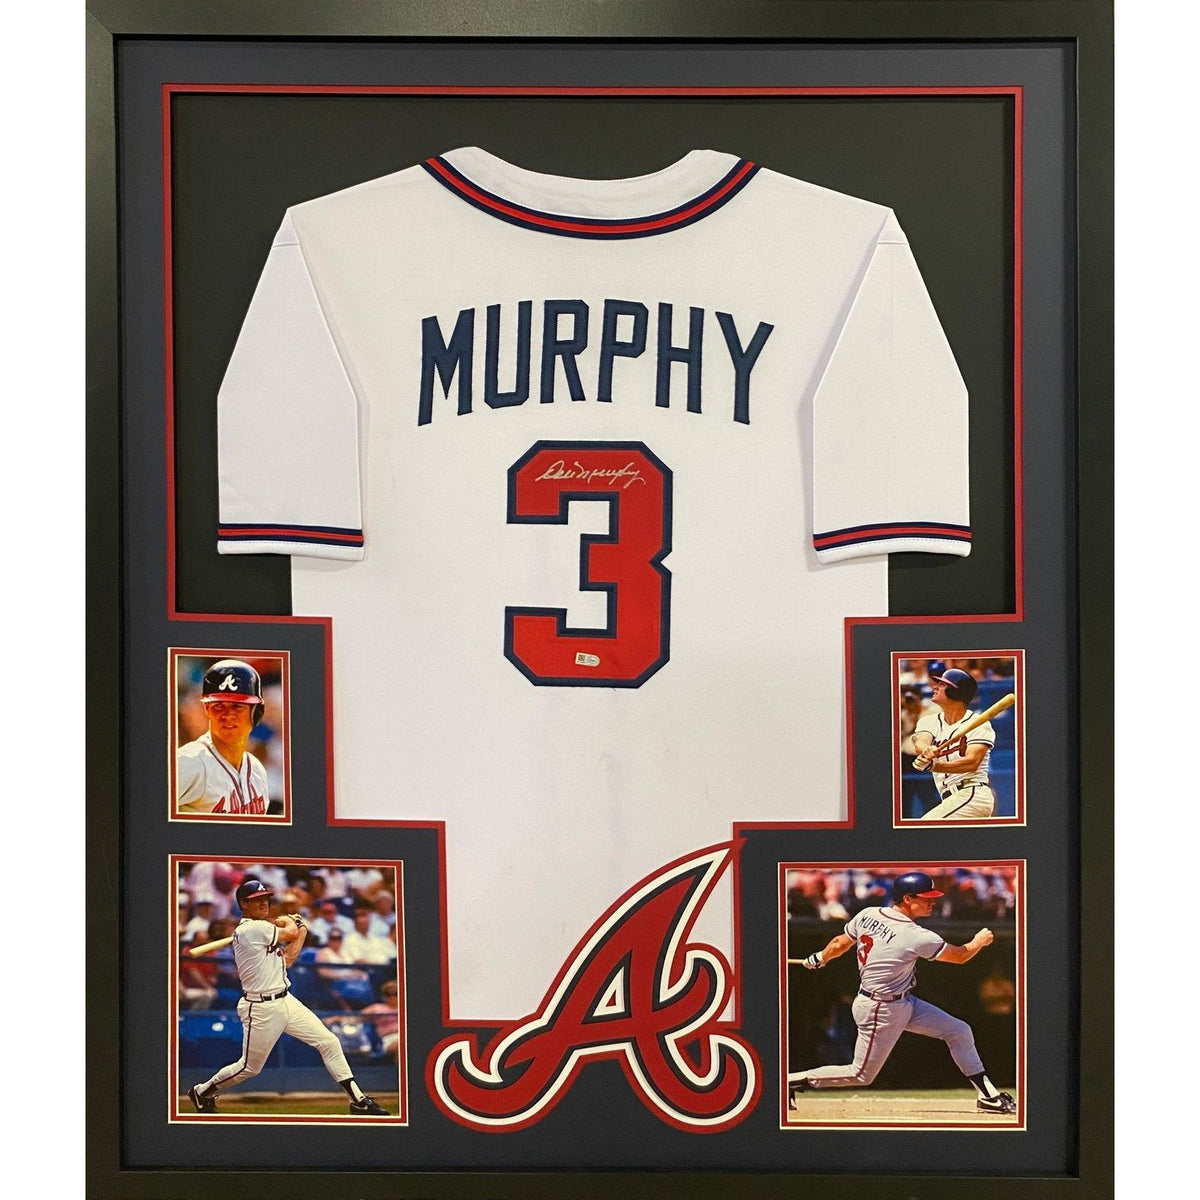 Dale Murphy Framed Jersey MLB Authenticated Autographed Signed Atlanta